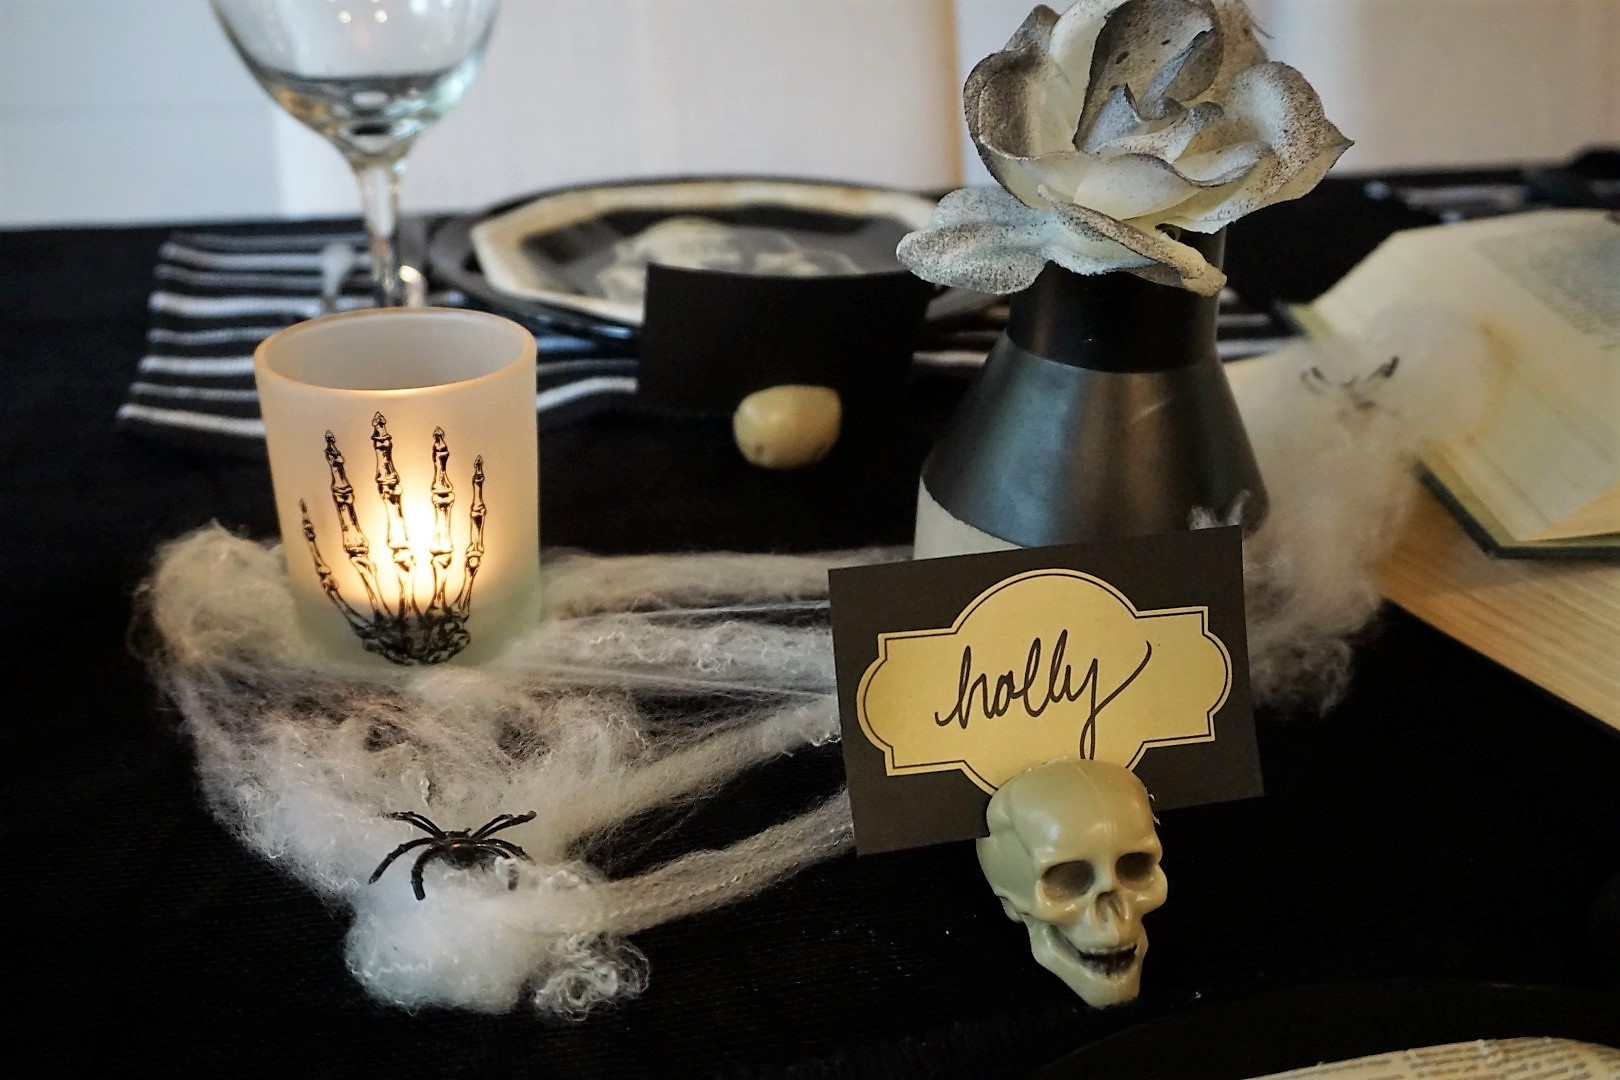  Dollar Tree is such a fun place to find Halloween decor. Click to learn more about the key items I bought and how to create your own Halloween table! | Legally Crafty #halloweendiy #halloweentable #halloweentablescape #halloweendiy 